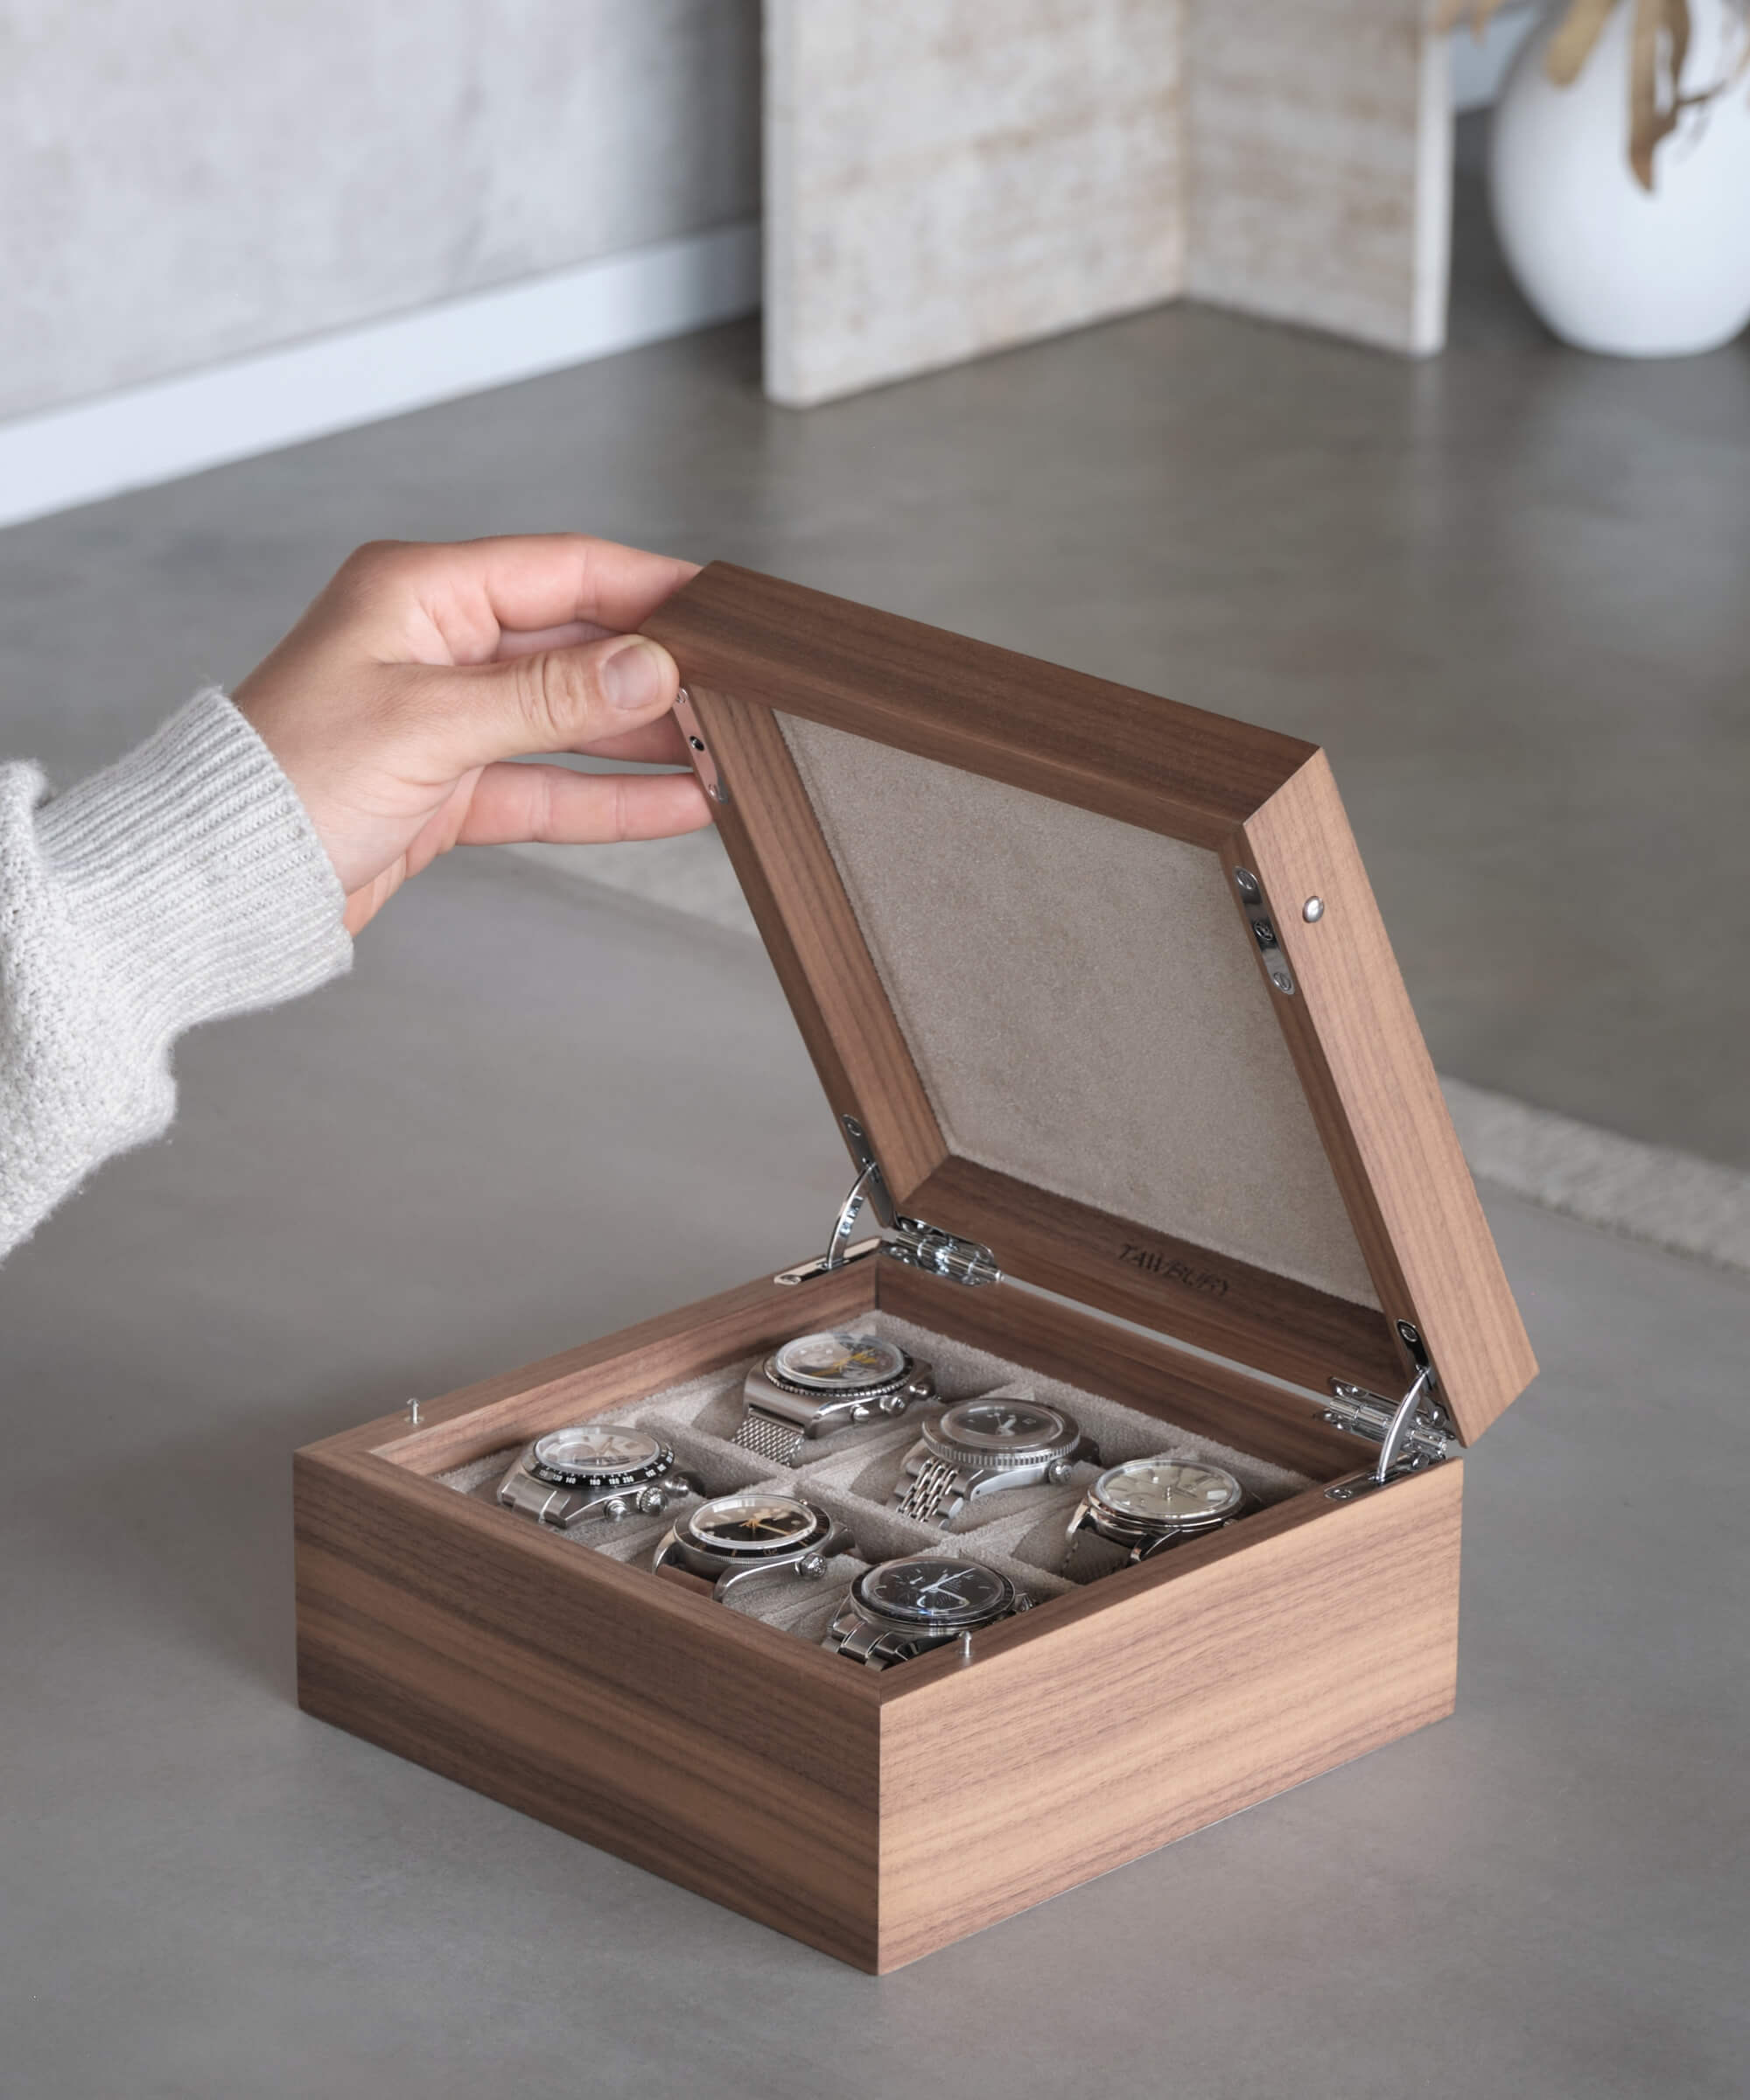 A watch enthusiast holding a TAWBURY Grove 6 Slot Watch Box with Solid Lid - Walnut, designed to organize and protect watches while also displaying them.